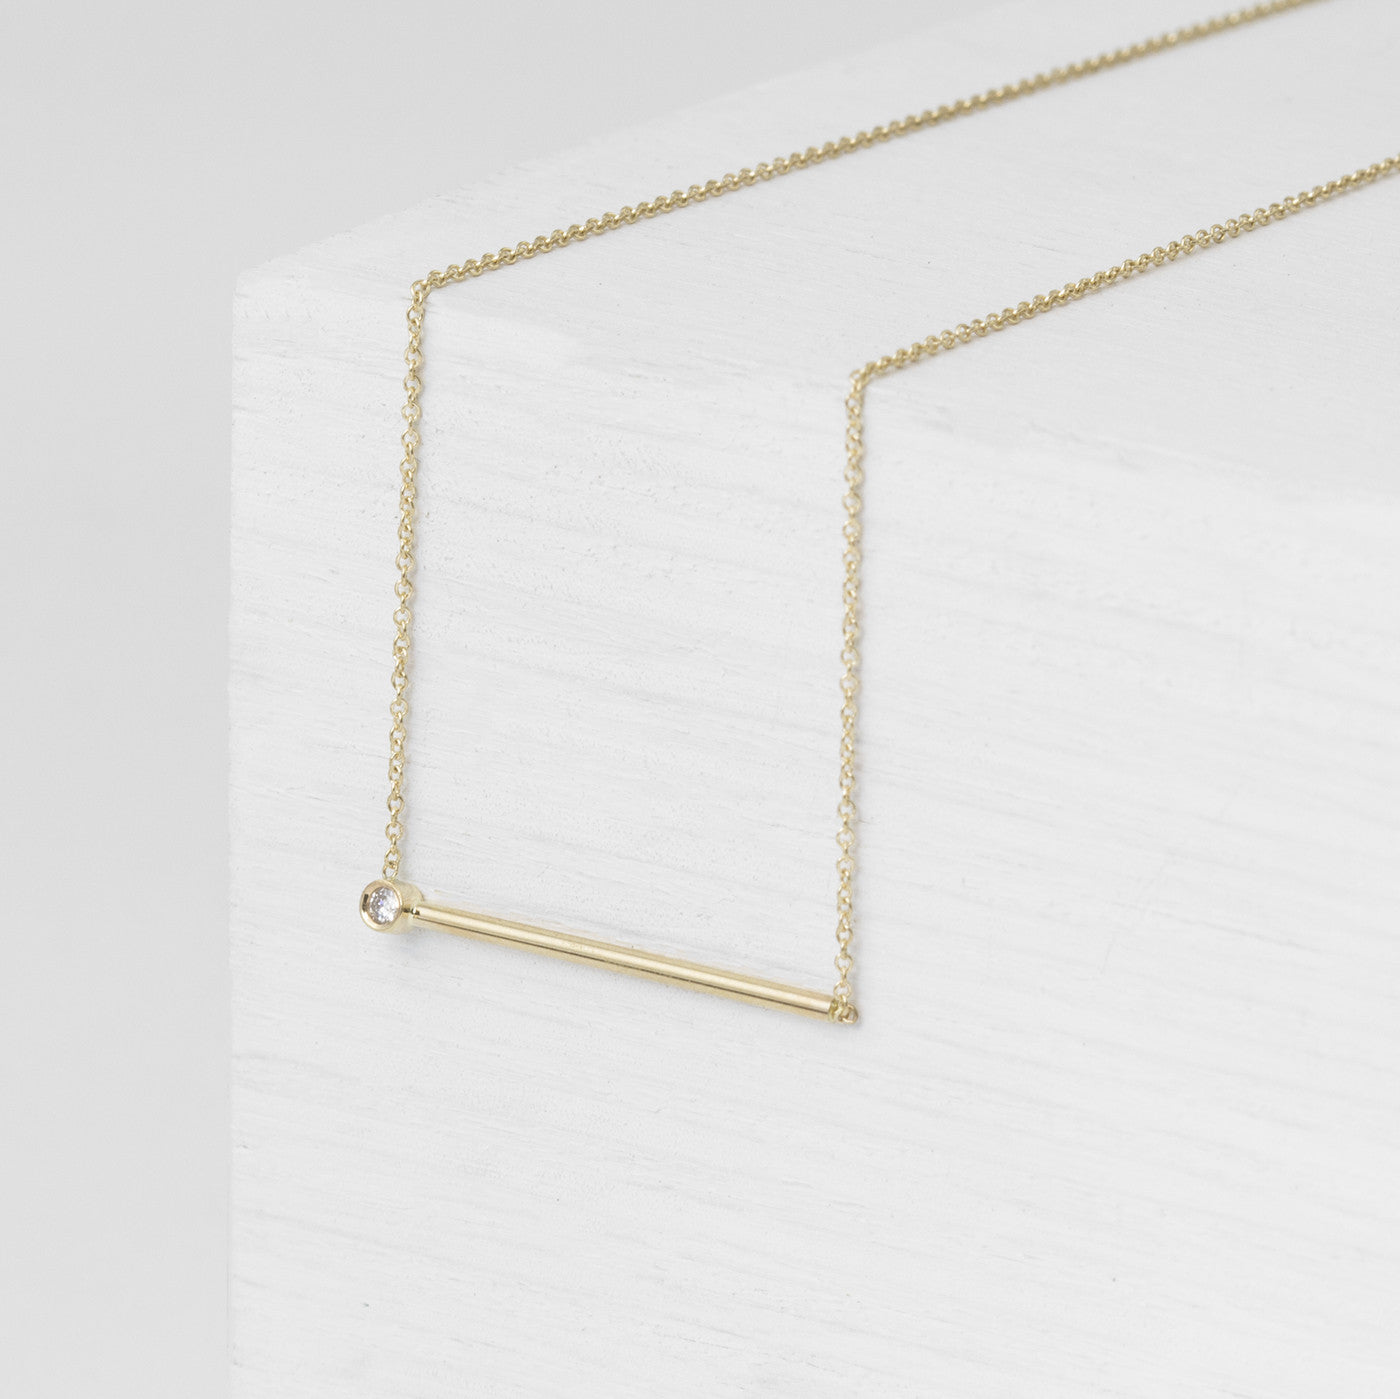 Enne Thin Necklace in 14k Gold set with White Diamond By SHW Fine Jewelry NYC